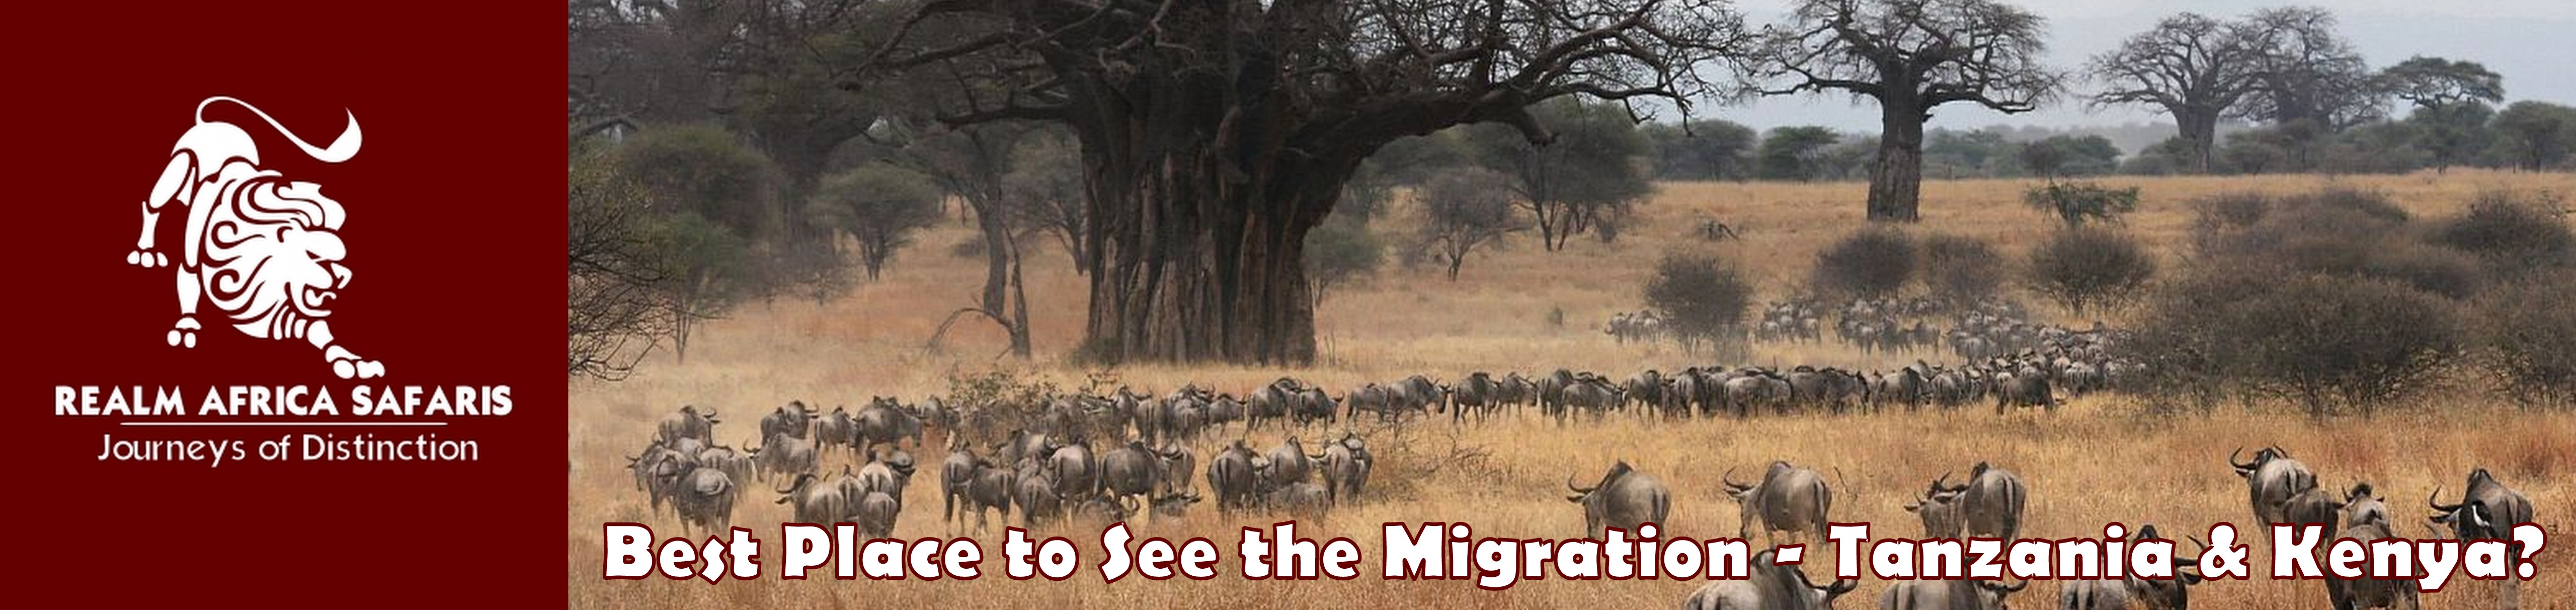 Best Place To see the wildebeest Migration - Kenya or Tanzania